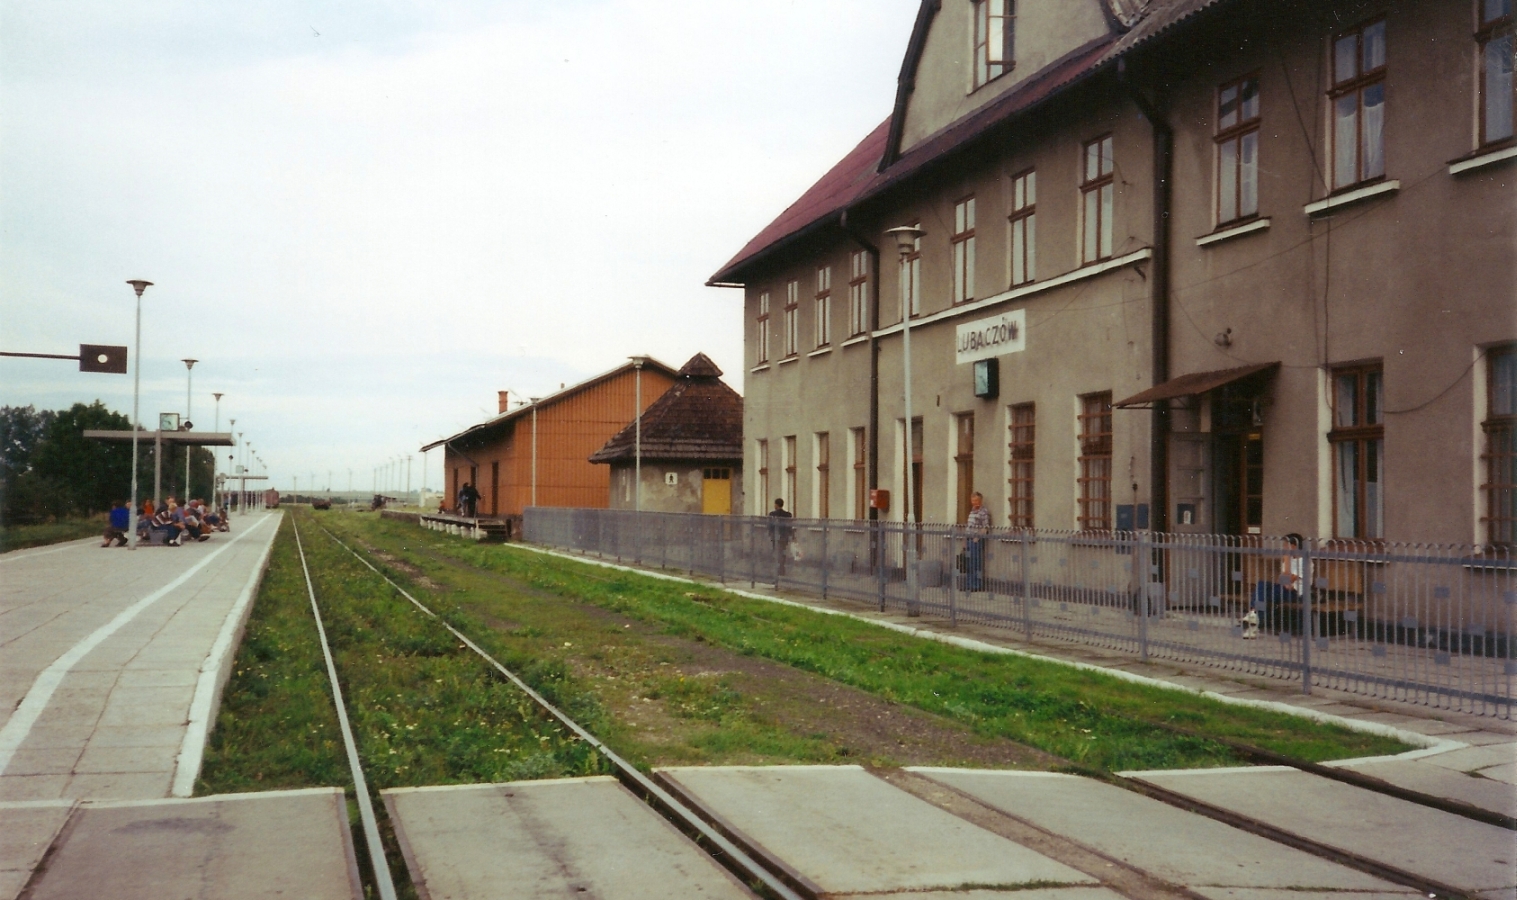 The outside 
of Lubaczów railway station. Kazik stands under the station sign, small with the whole image.